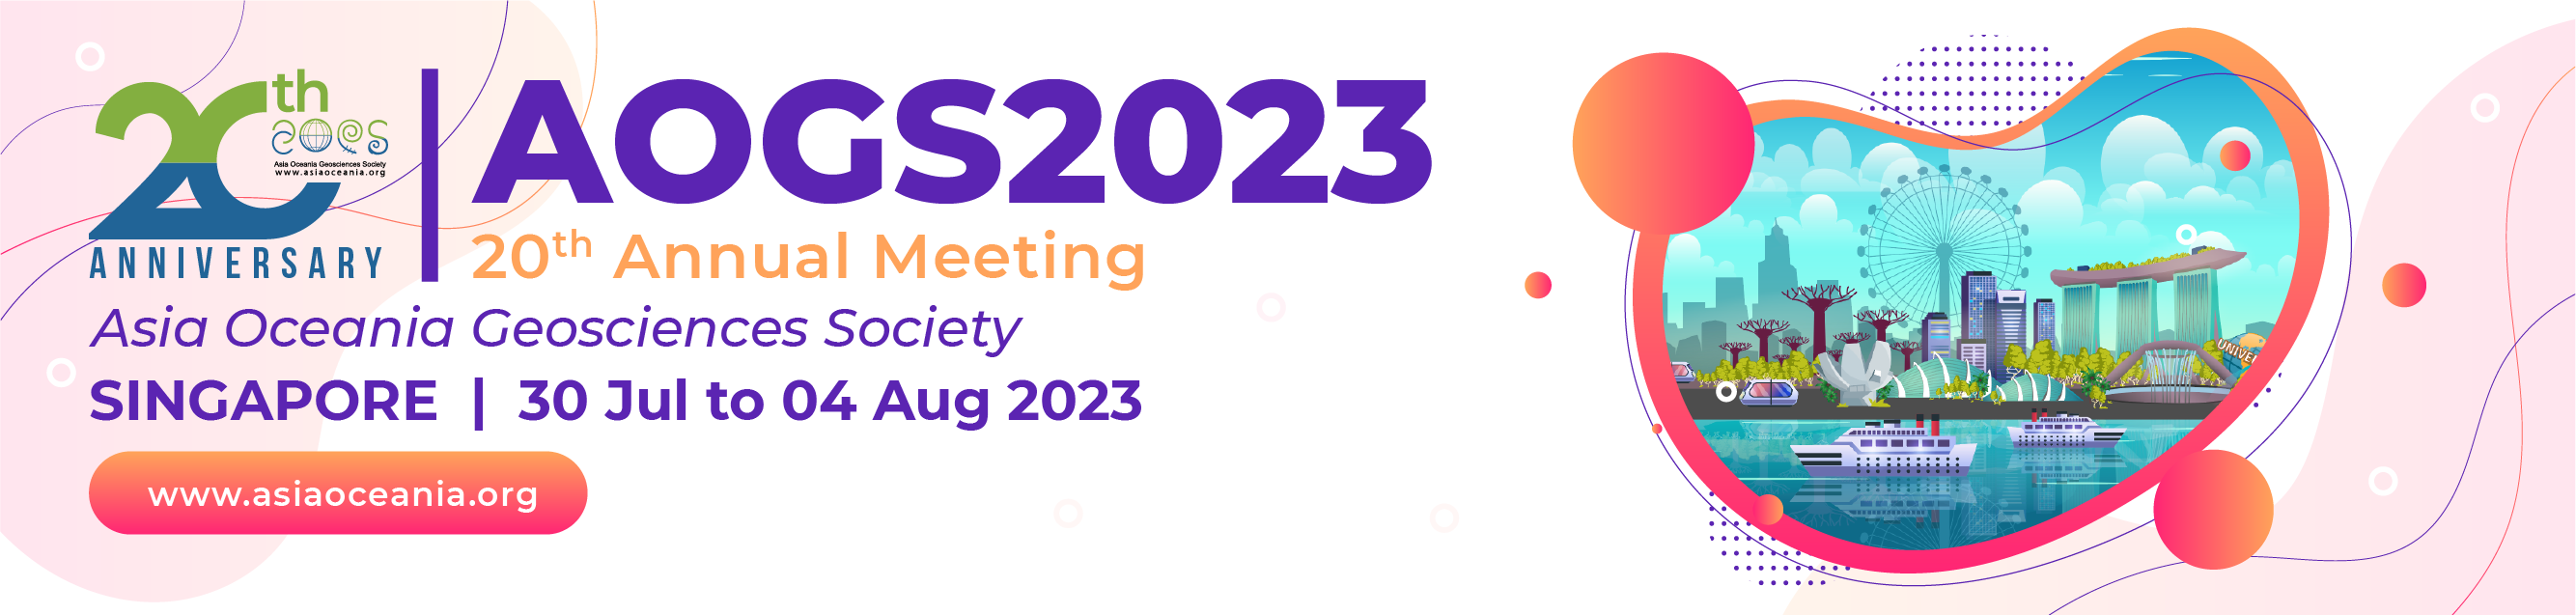 2023 AOGS annual meeting